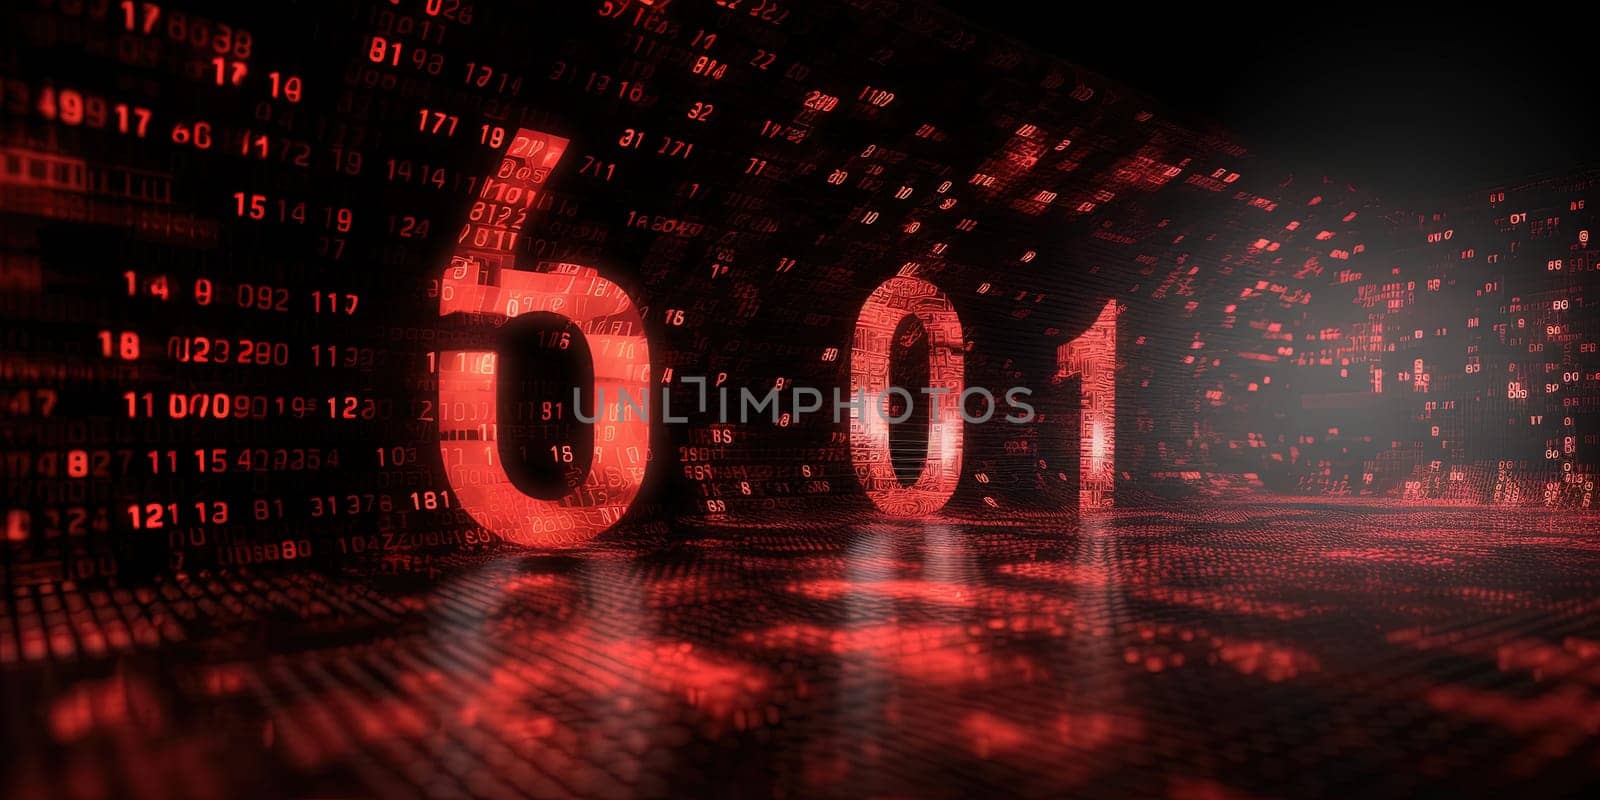 Digitals on a red background, 5G internet communications by tan4ikk1